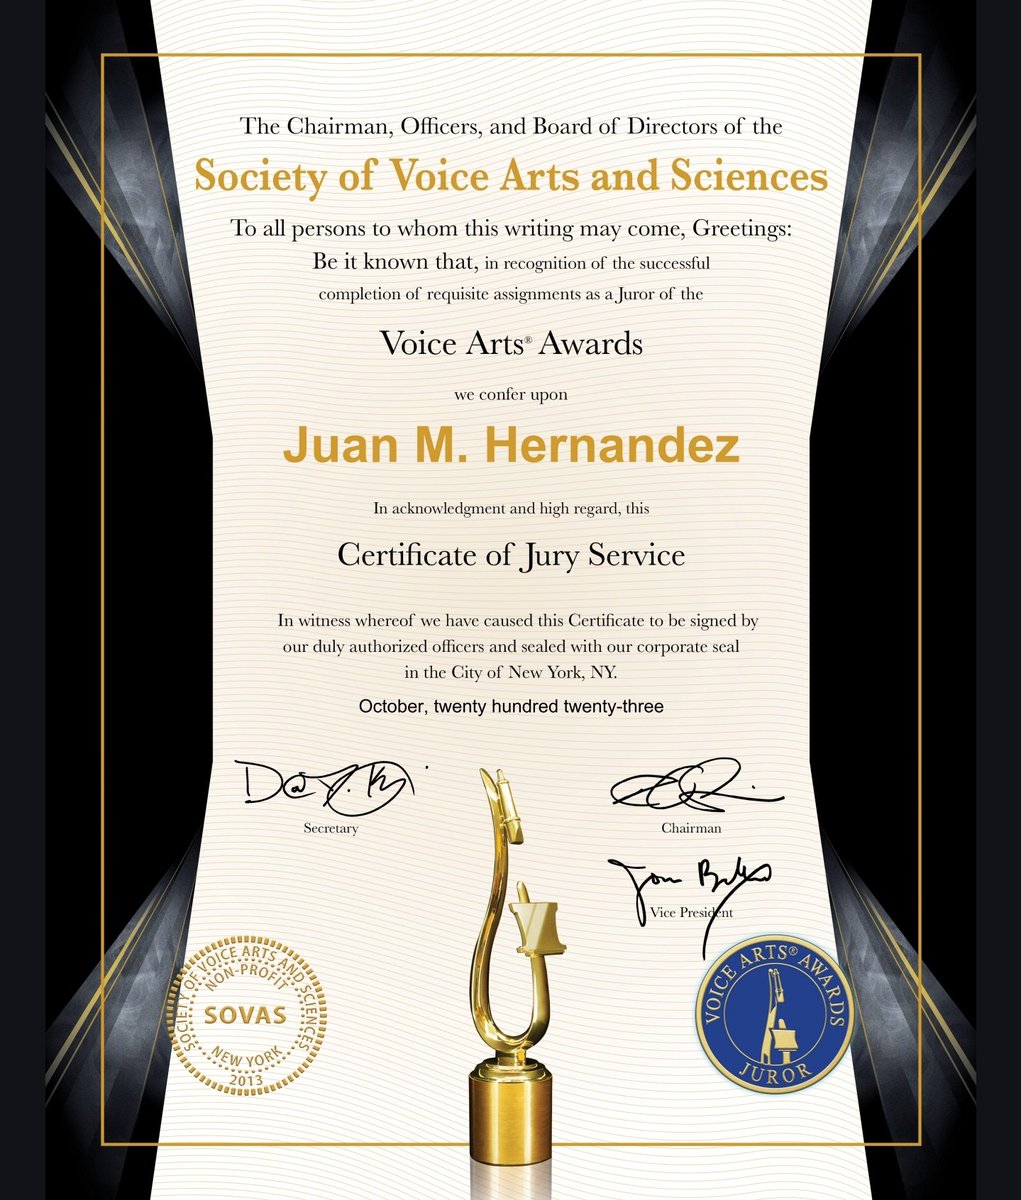 The privilege of serving as a @SovasVoice Awards juror is truly fantastic. I am excited about my forthcoming involvement and the opportunity to judge these remarkable submissions from amazing and gifted actors!